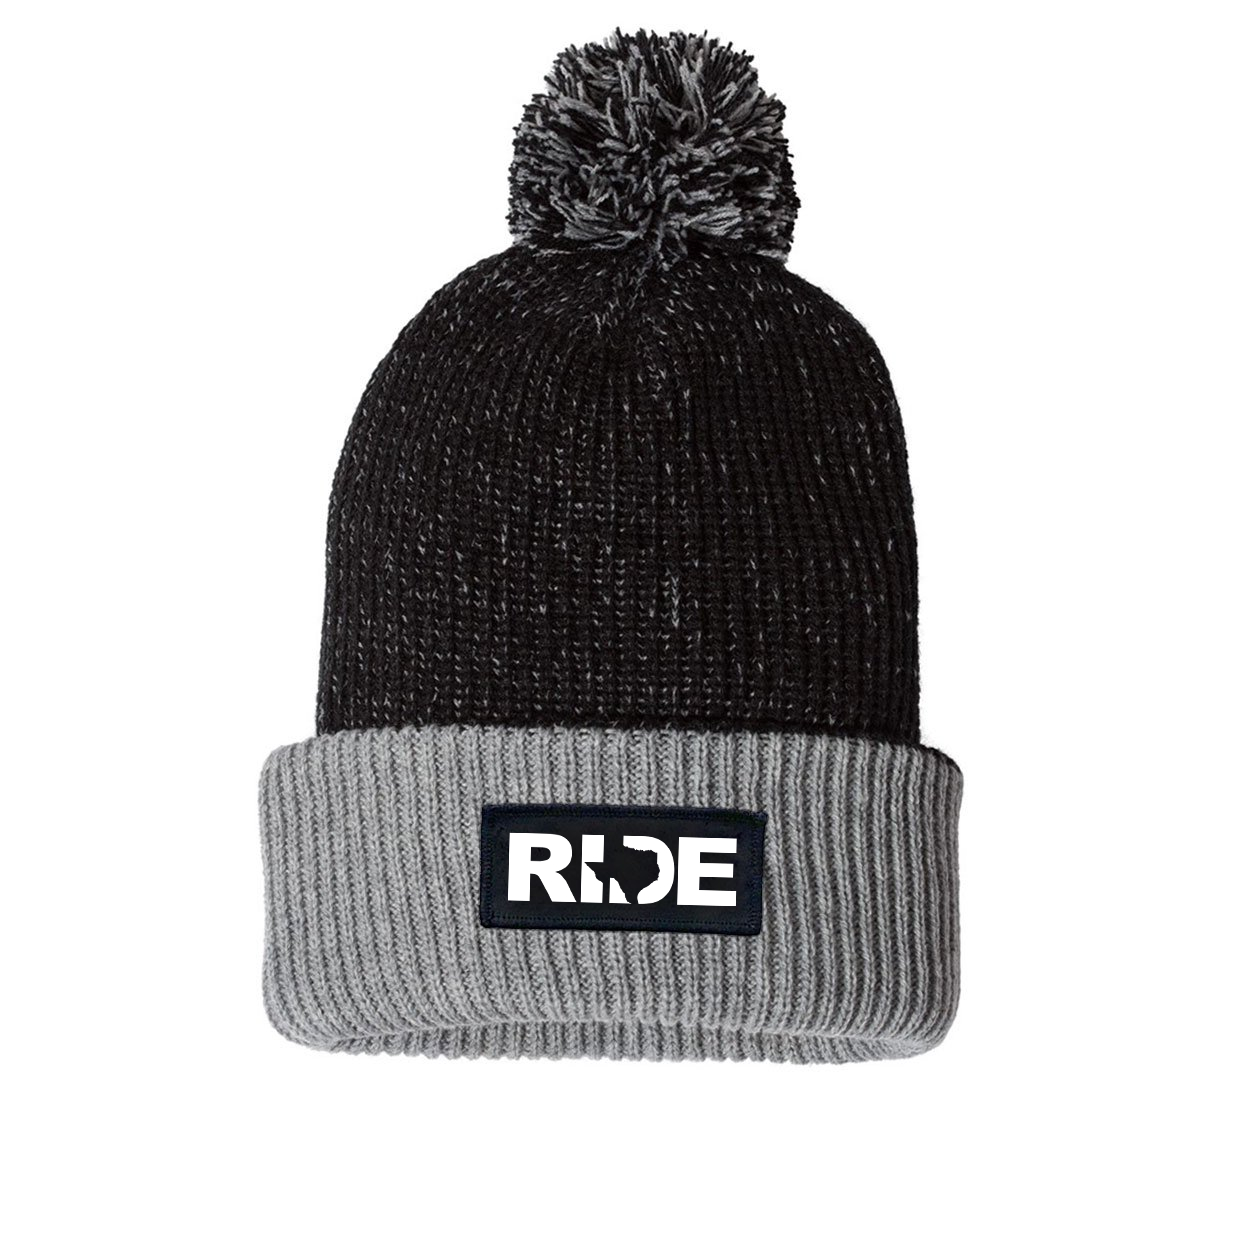 Ride Texas Night Out Woven Patch Roll Up Pom Knit Beanie Black/Gray (White Logo)